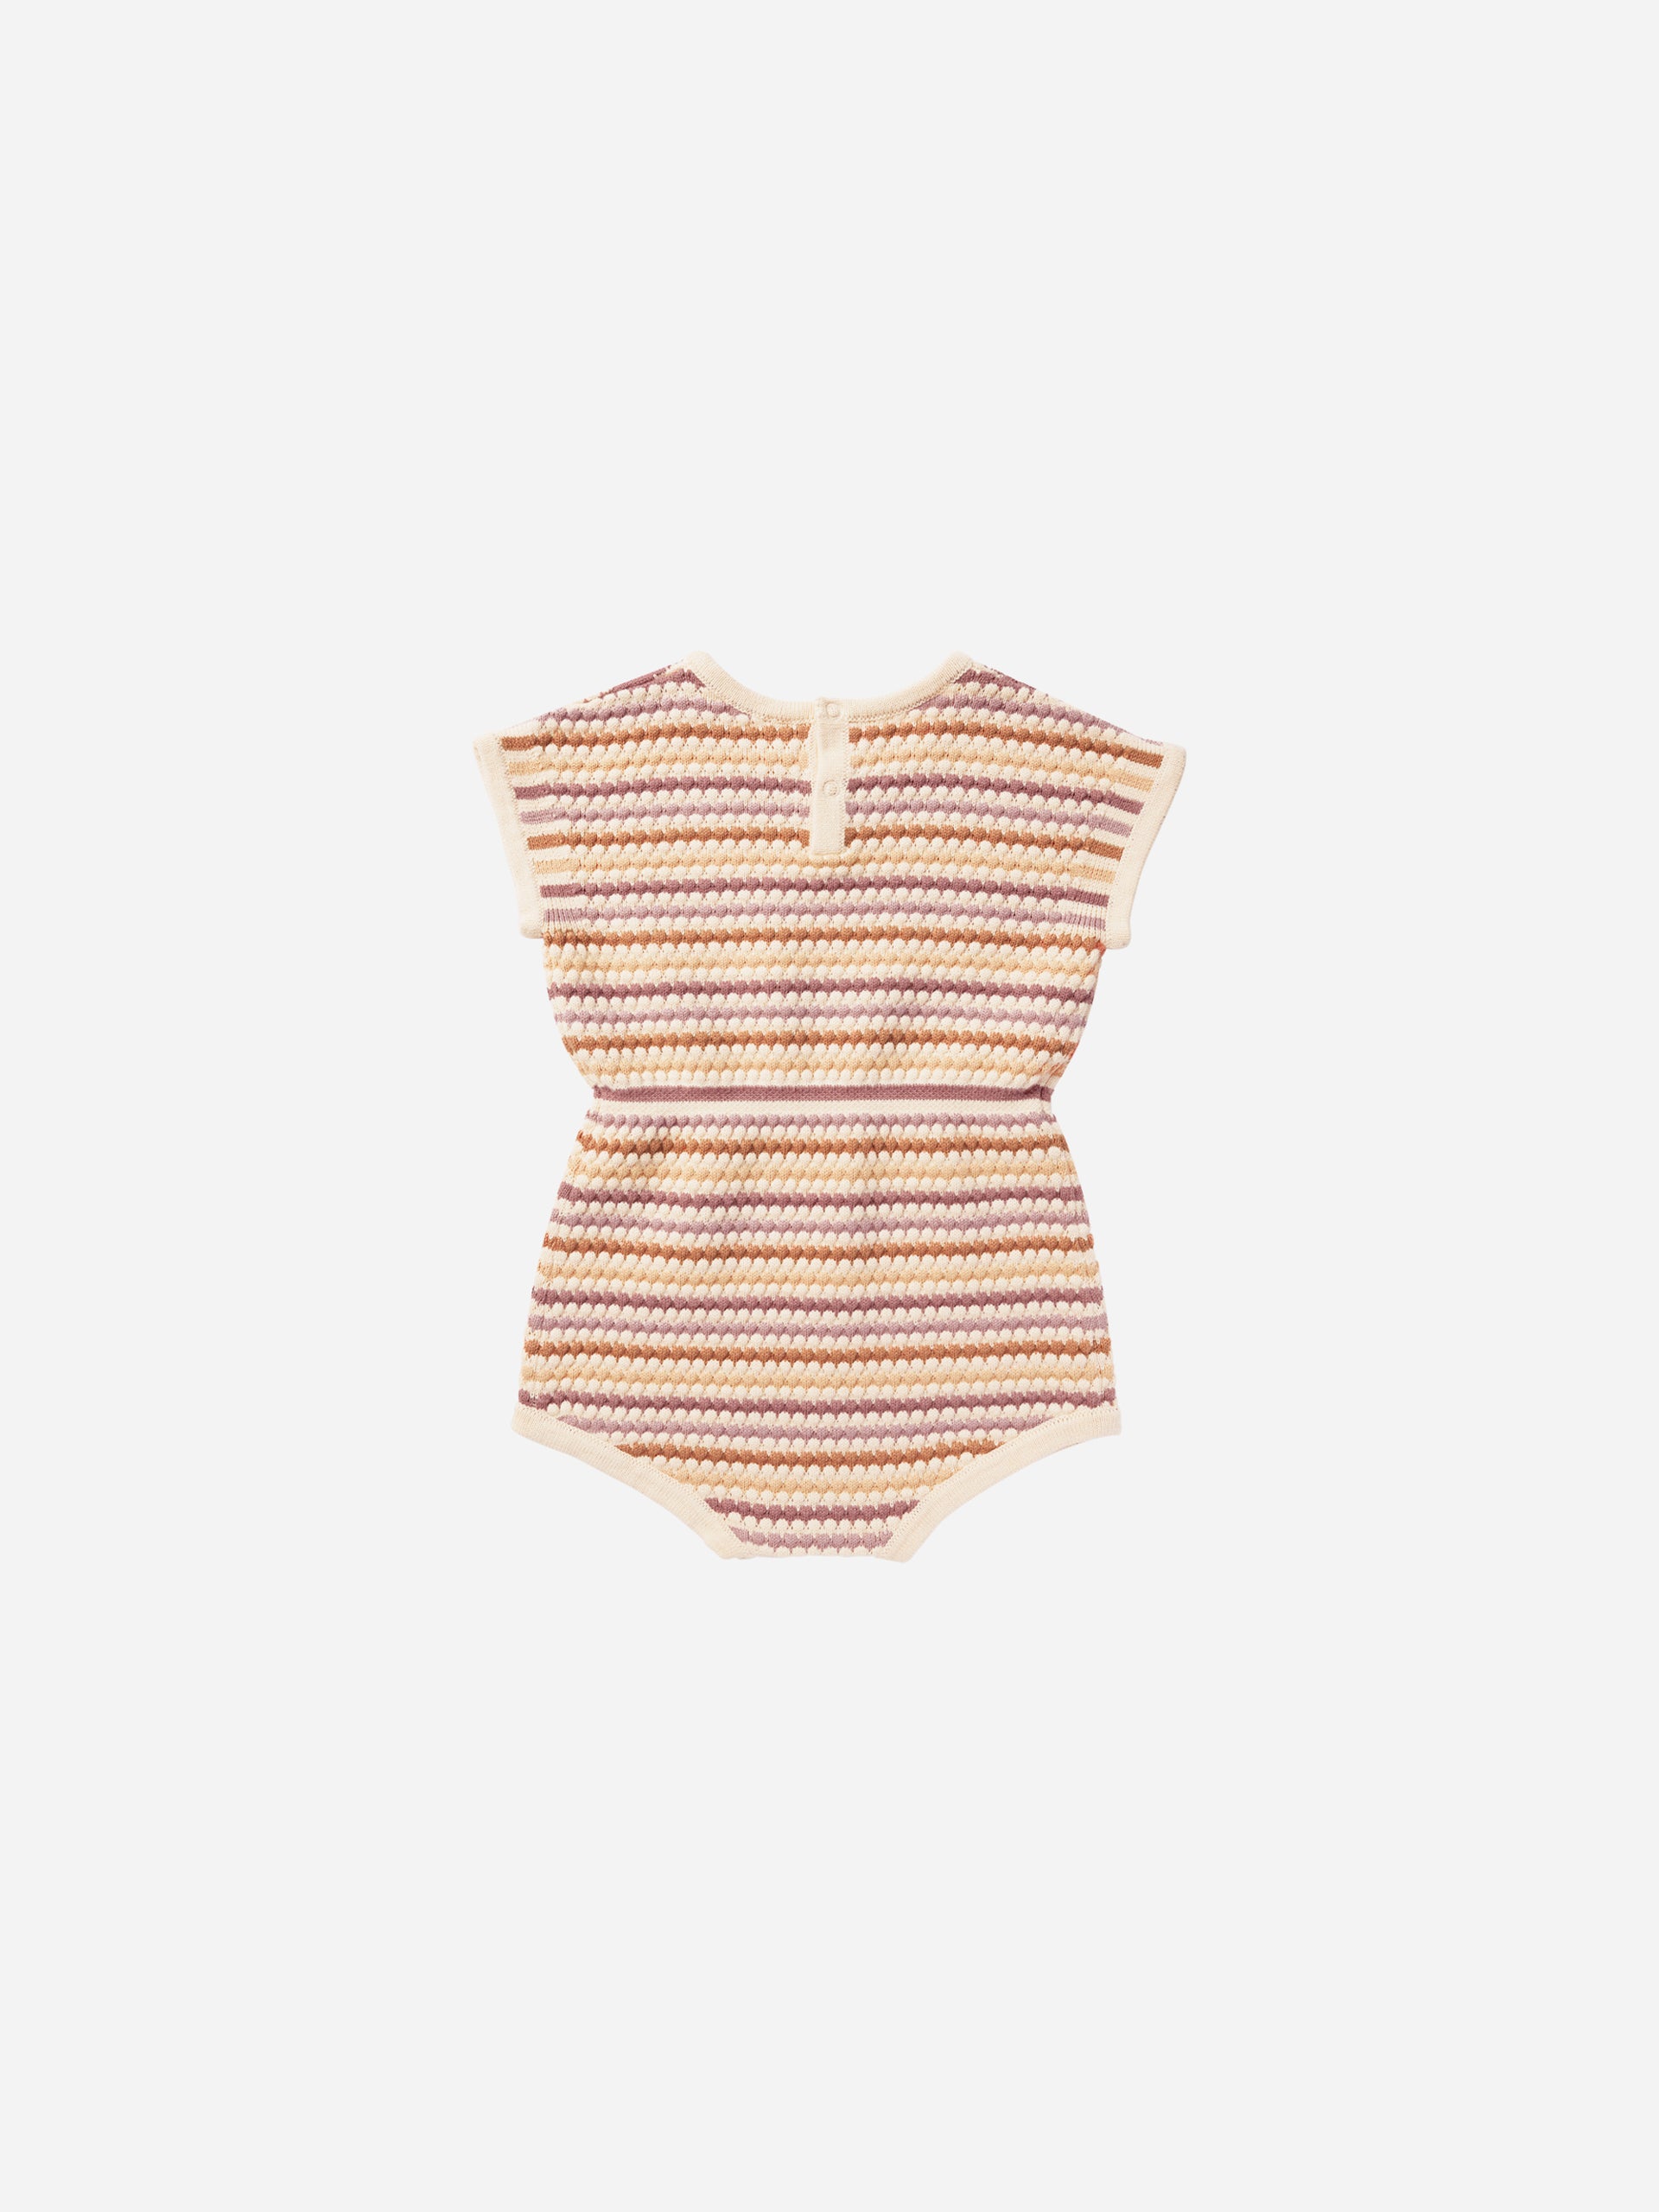 Kai Romper || Honeycomb Stripe - Rylee + Cru | Kids Clothes | Trendy Baby Clothes | Modern Infant Outfits |